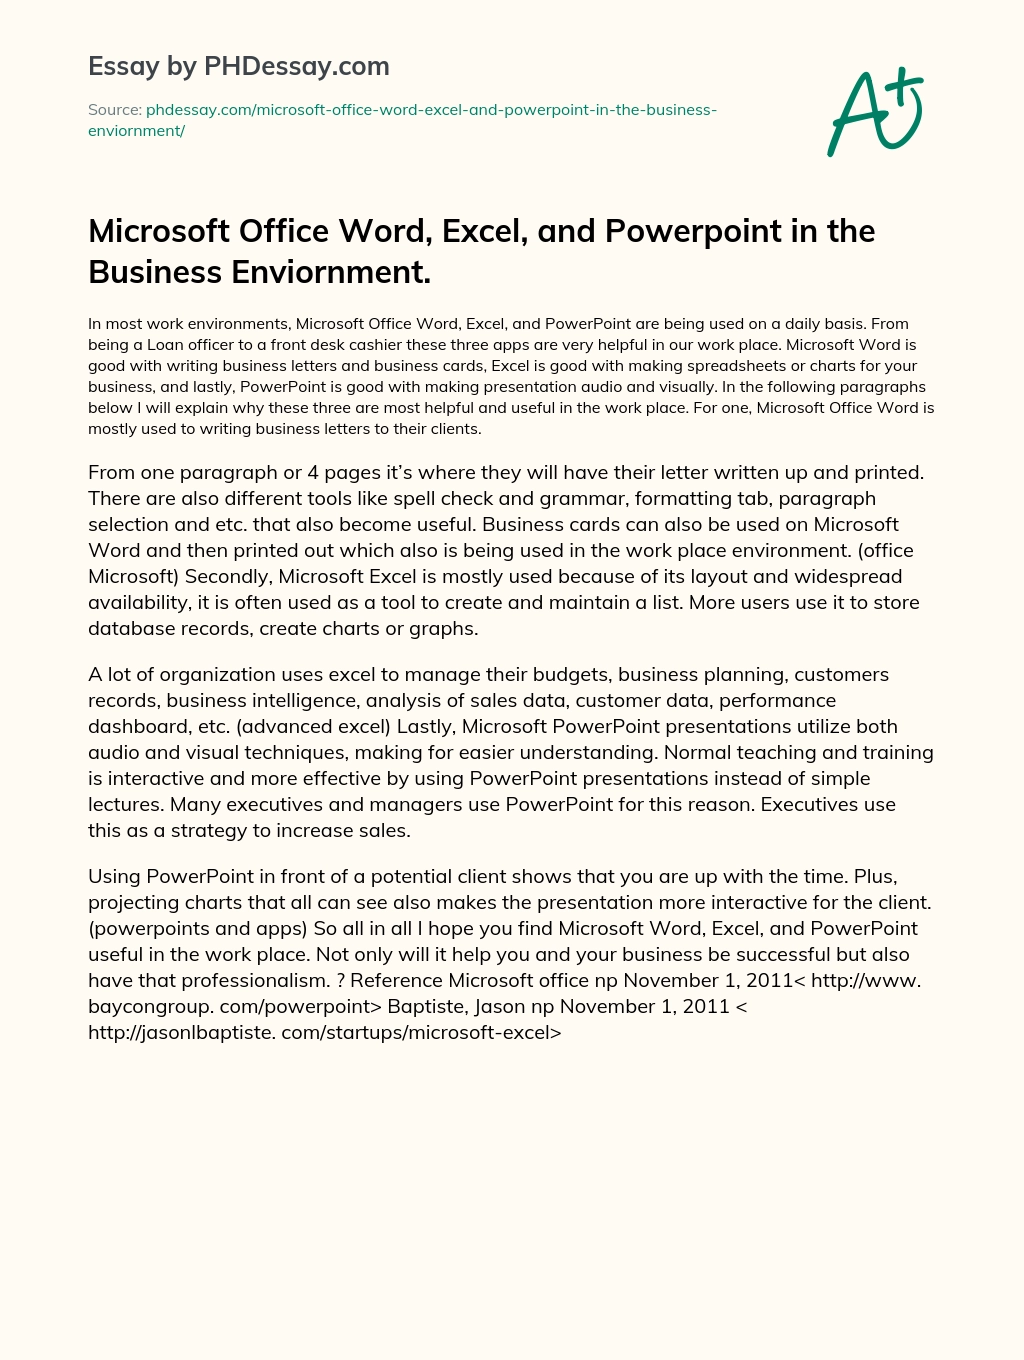 Microsoft Office Word, Excel, and Powerpoint in the Business Enviornment. essay